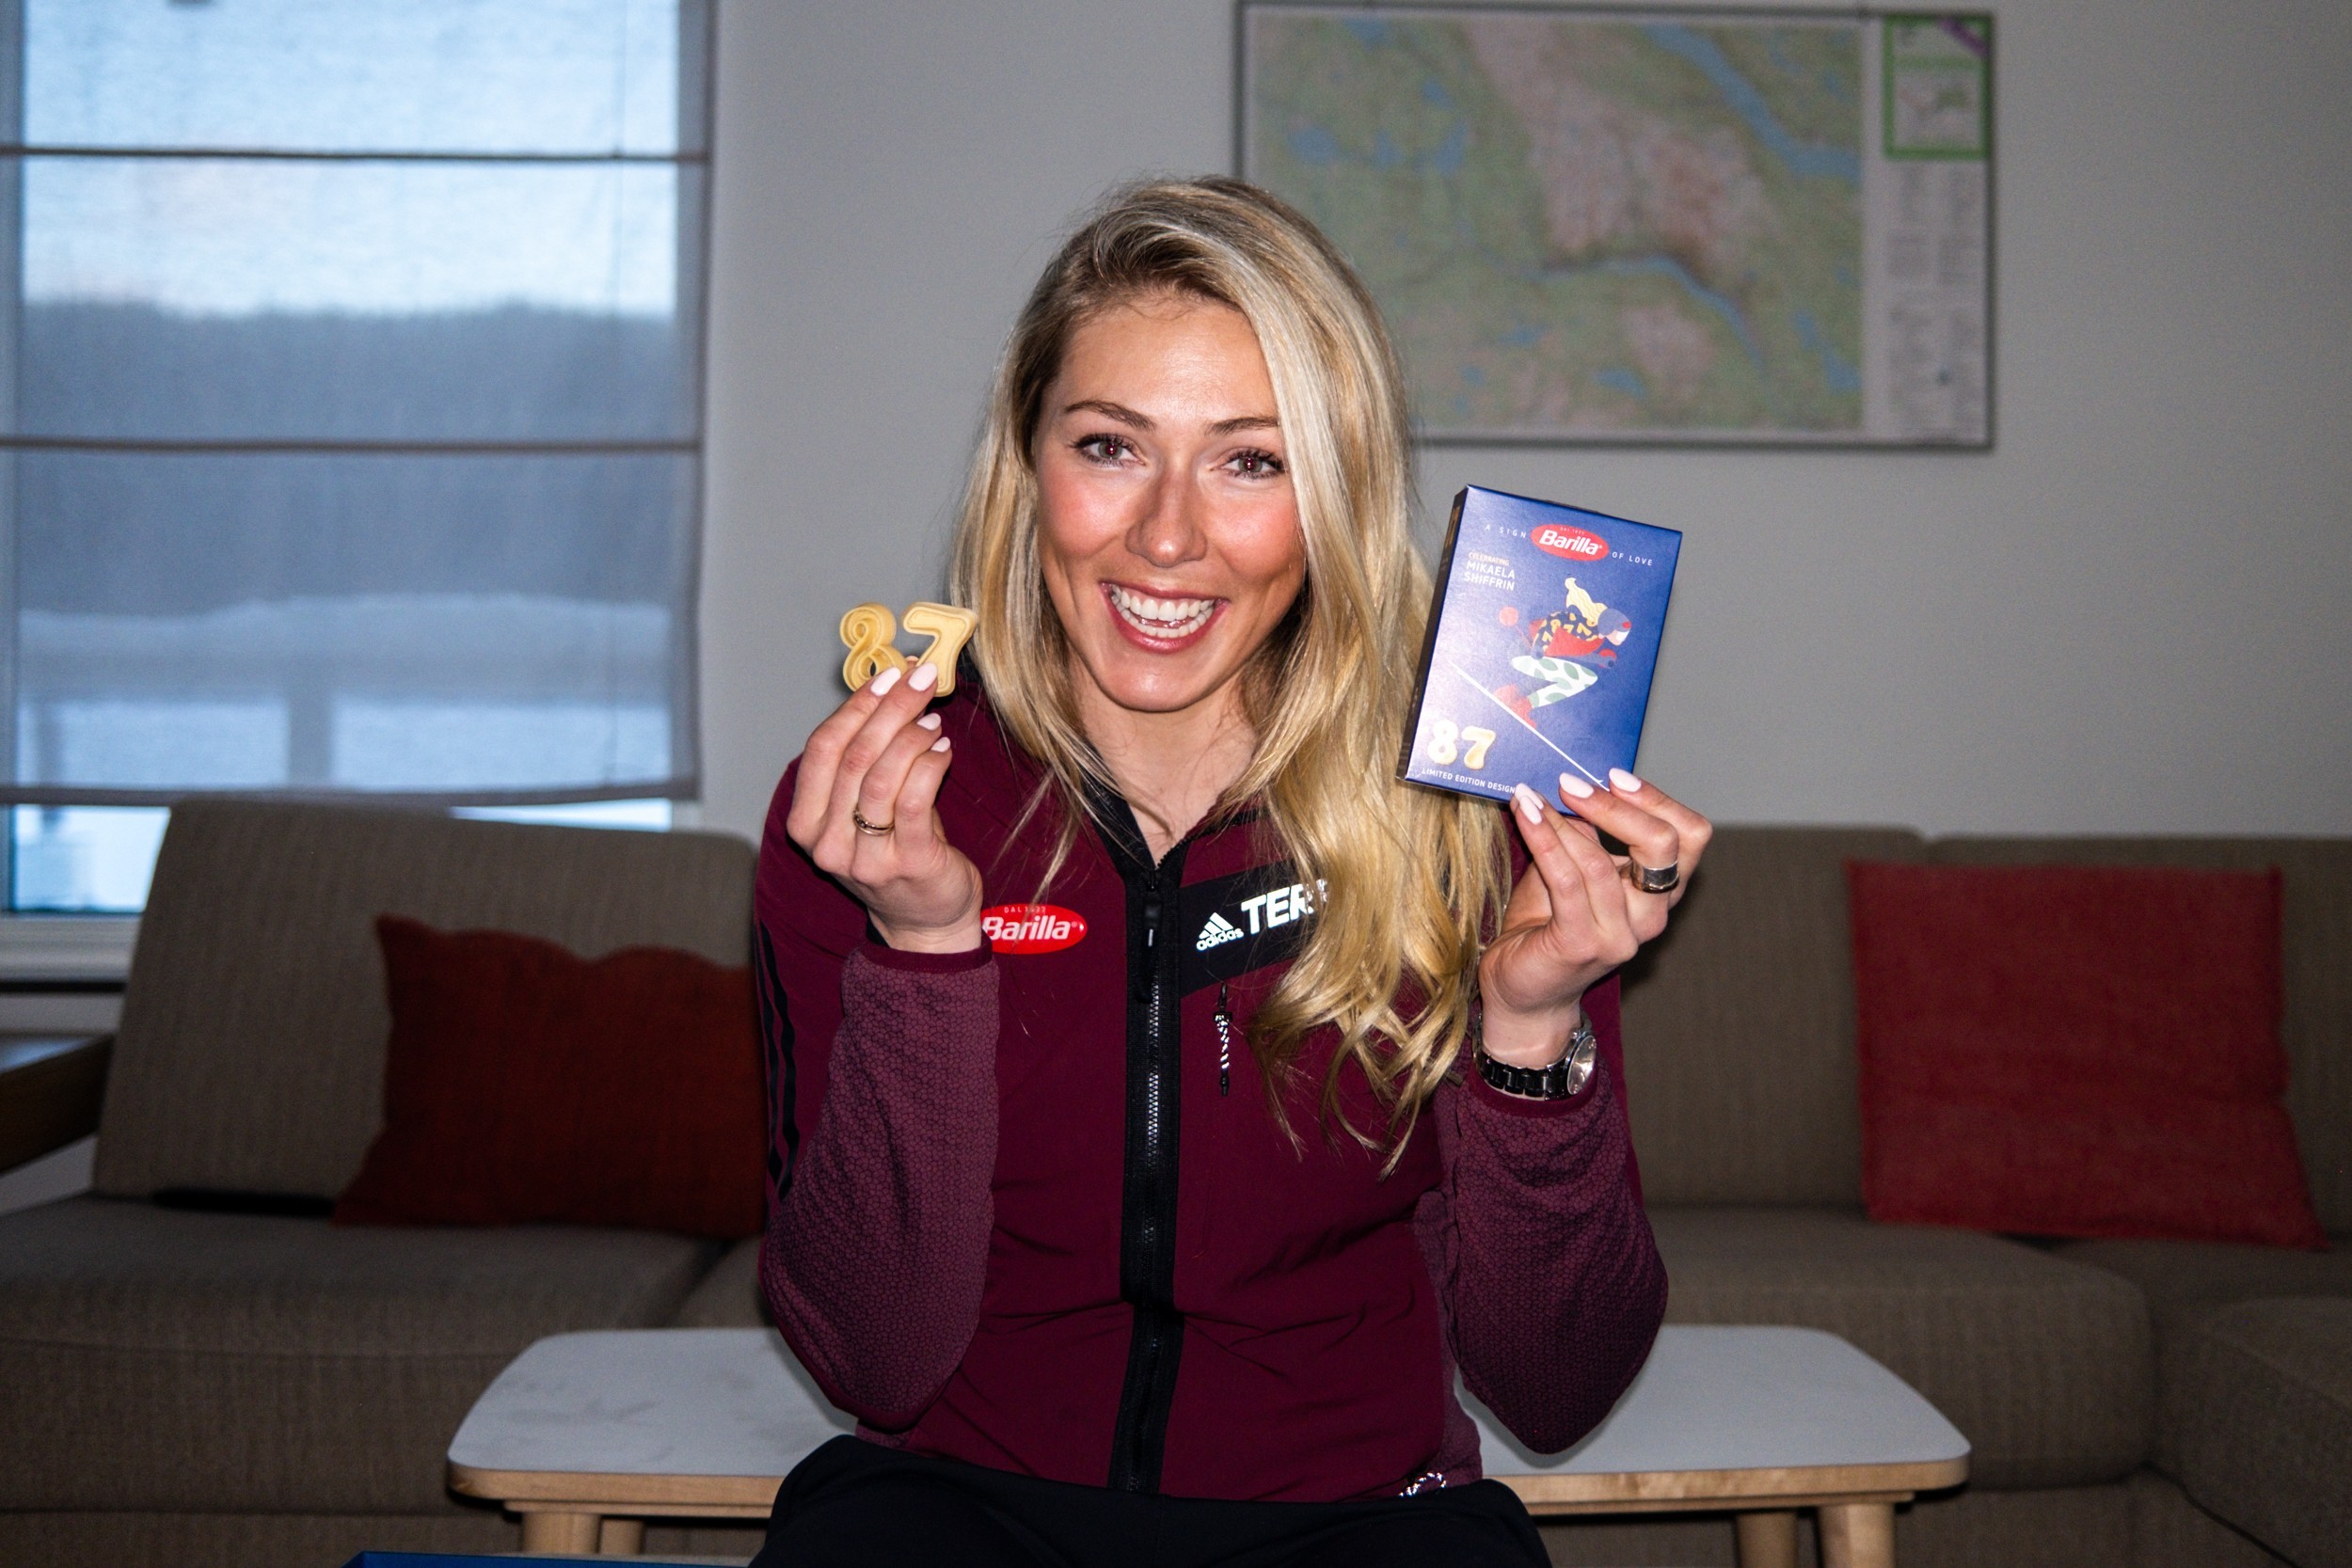 Barilla & Mikaela Shiffrin: Greatness starts with a great recipe - Pack No. 6  